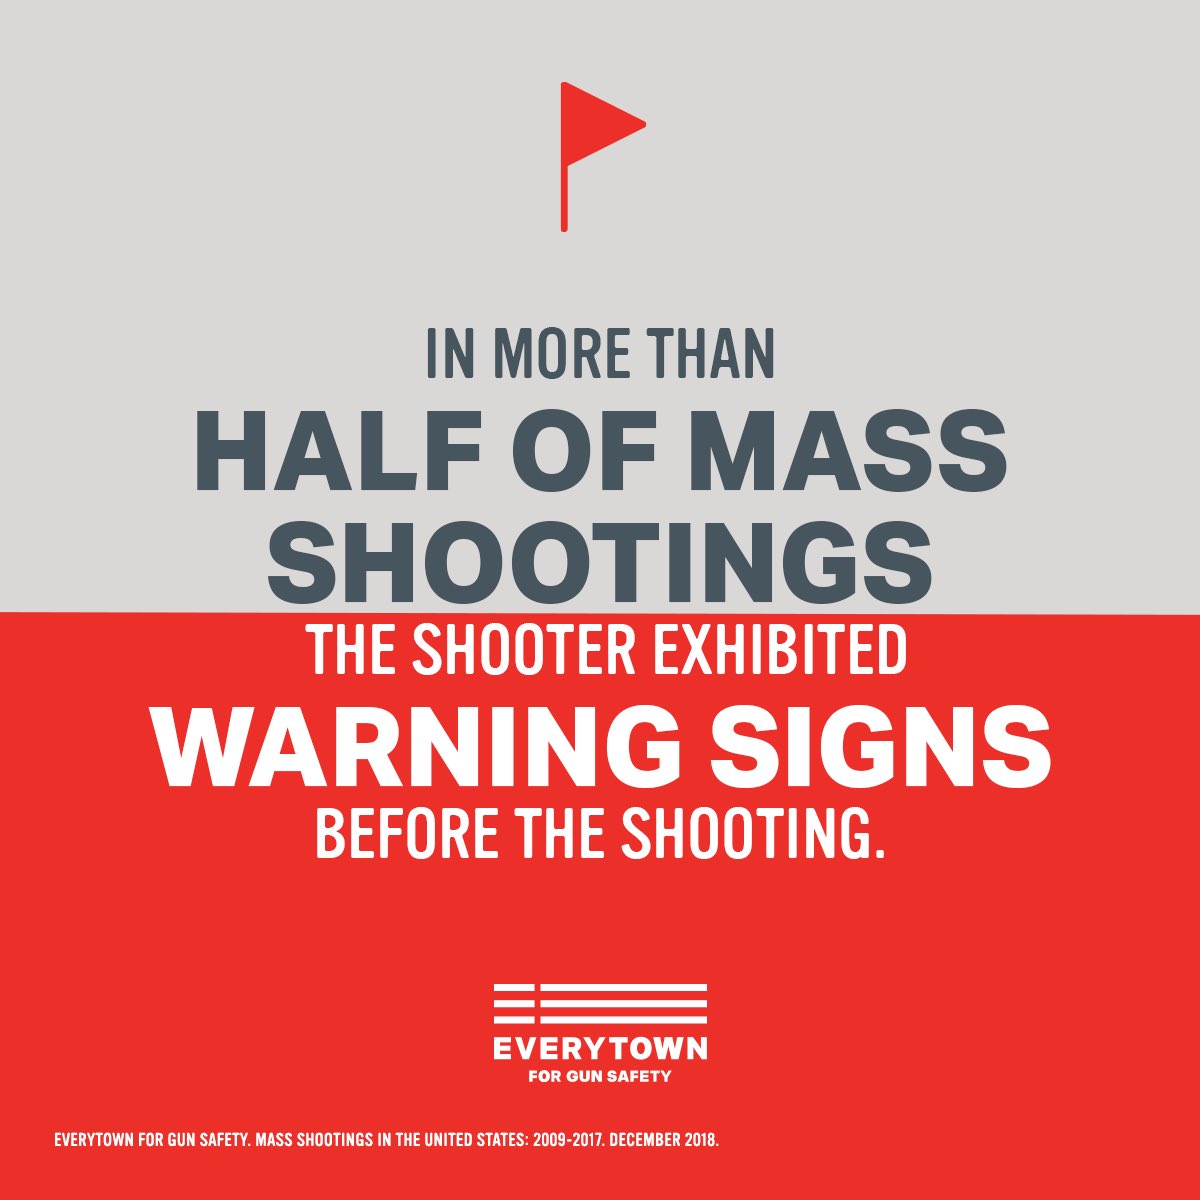 Gun Violence is
Predictable.

Gun Violence is 
Preventable.  

Will you finally help us do something to change our uniquely American trauma?

Text READY to join @MomsDemand today.

#10YearsOfMoms
#MSUstrong 
#ParklandStrong